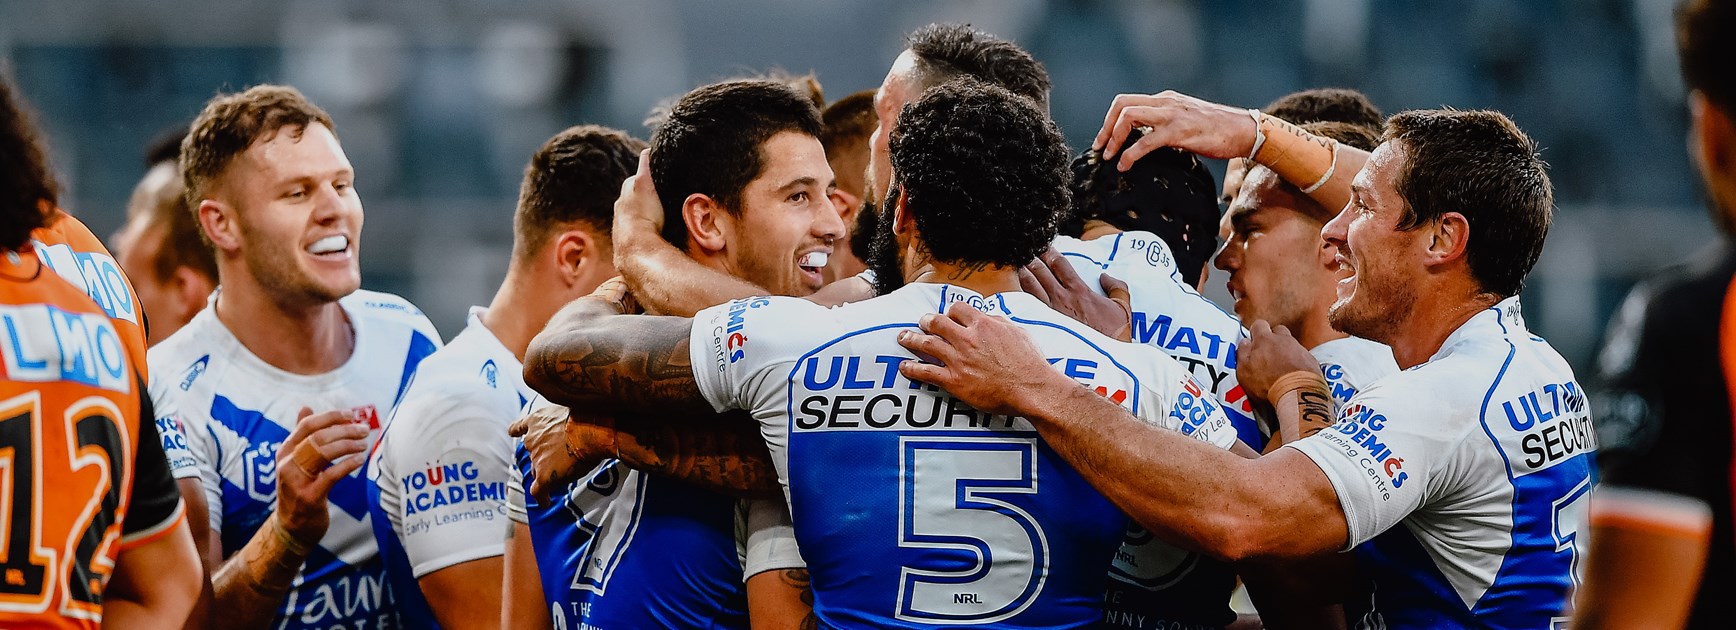 Averillo scores two as Bulldogs romp to big win over Wests Tigers